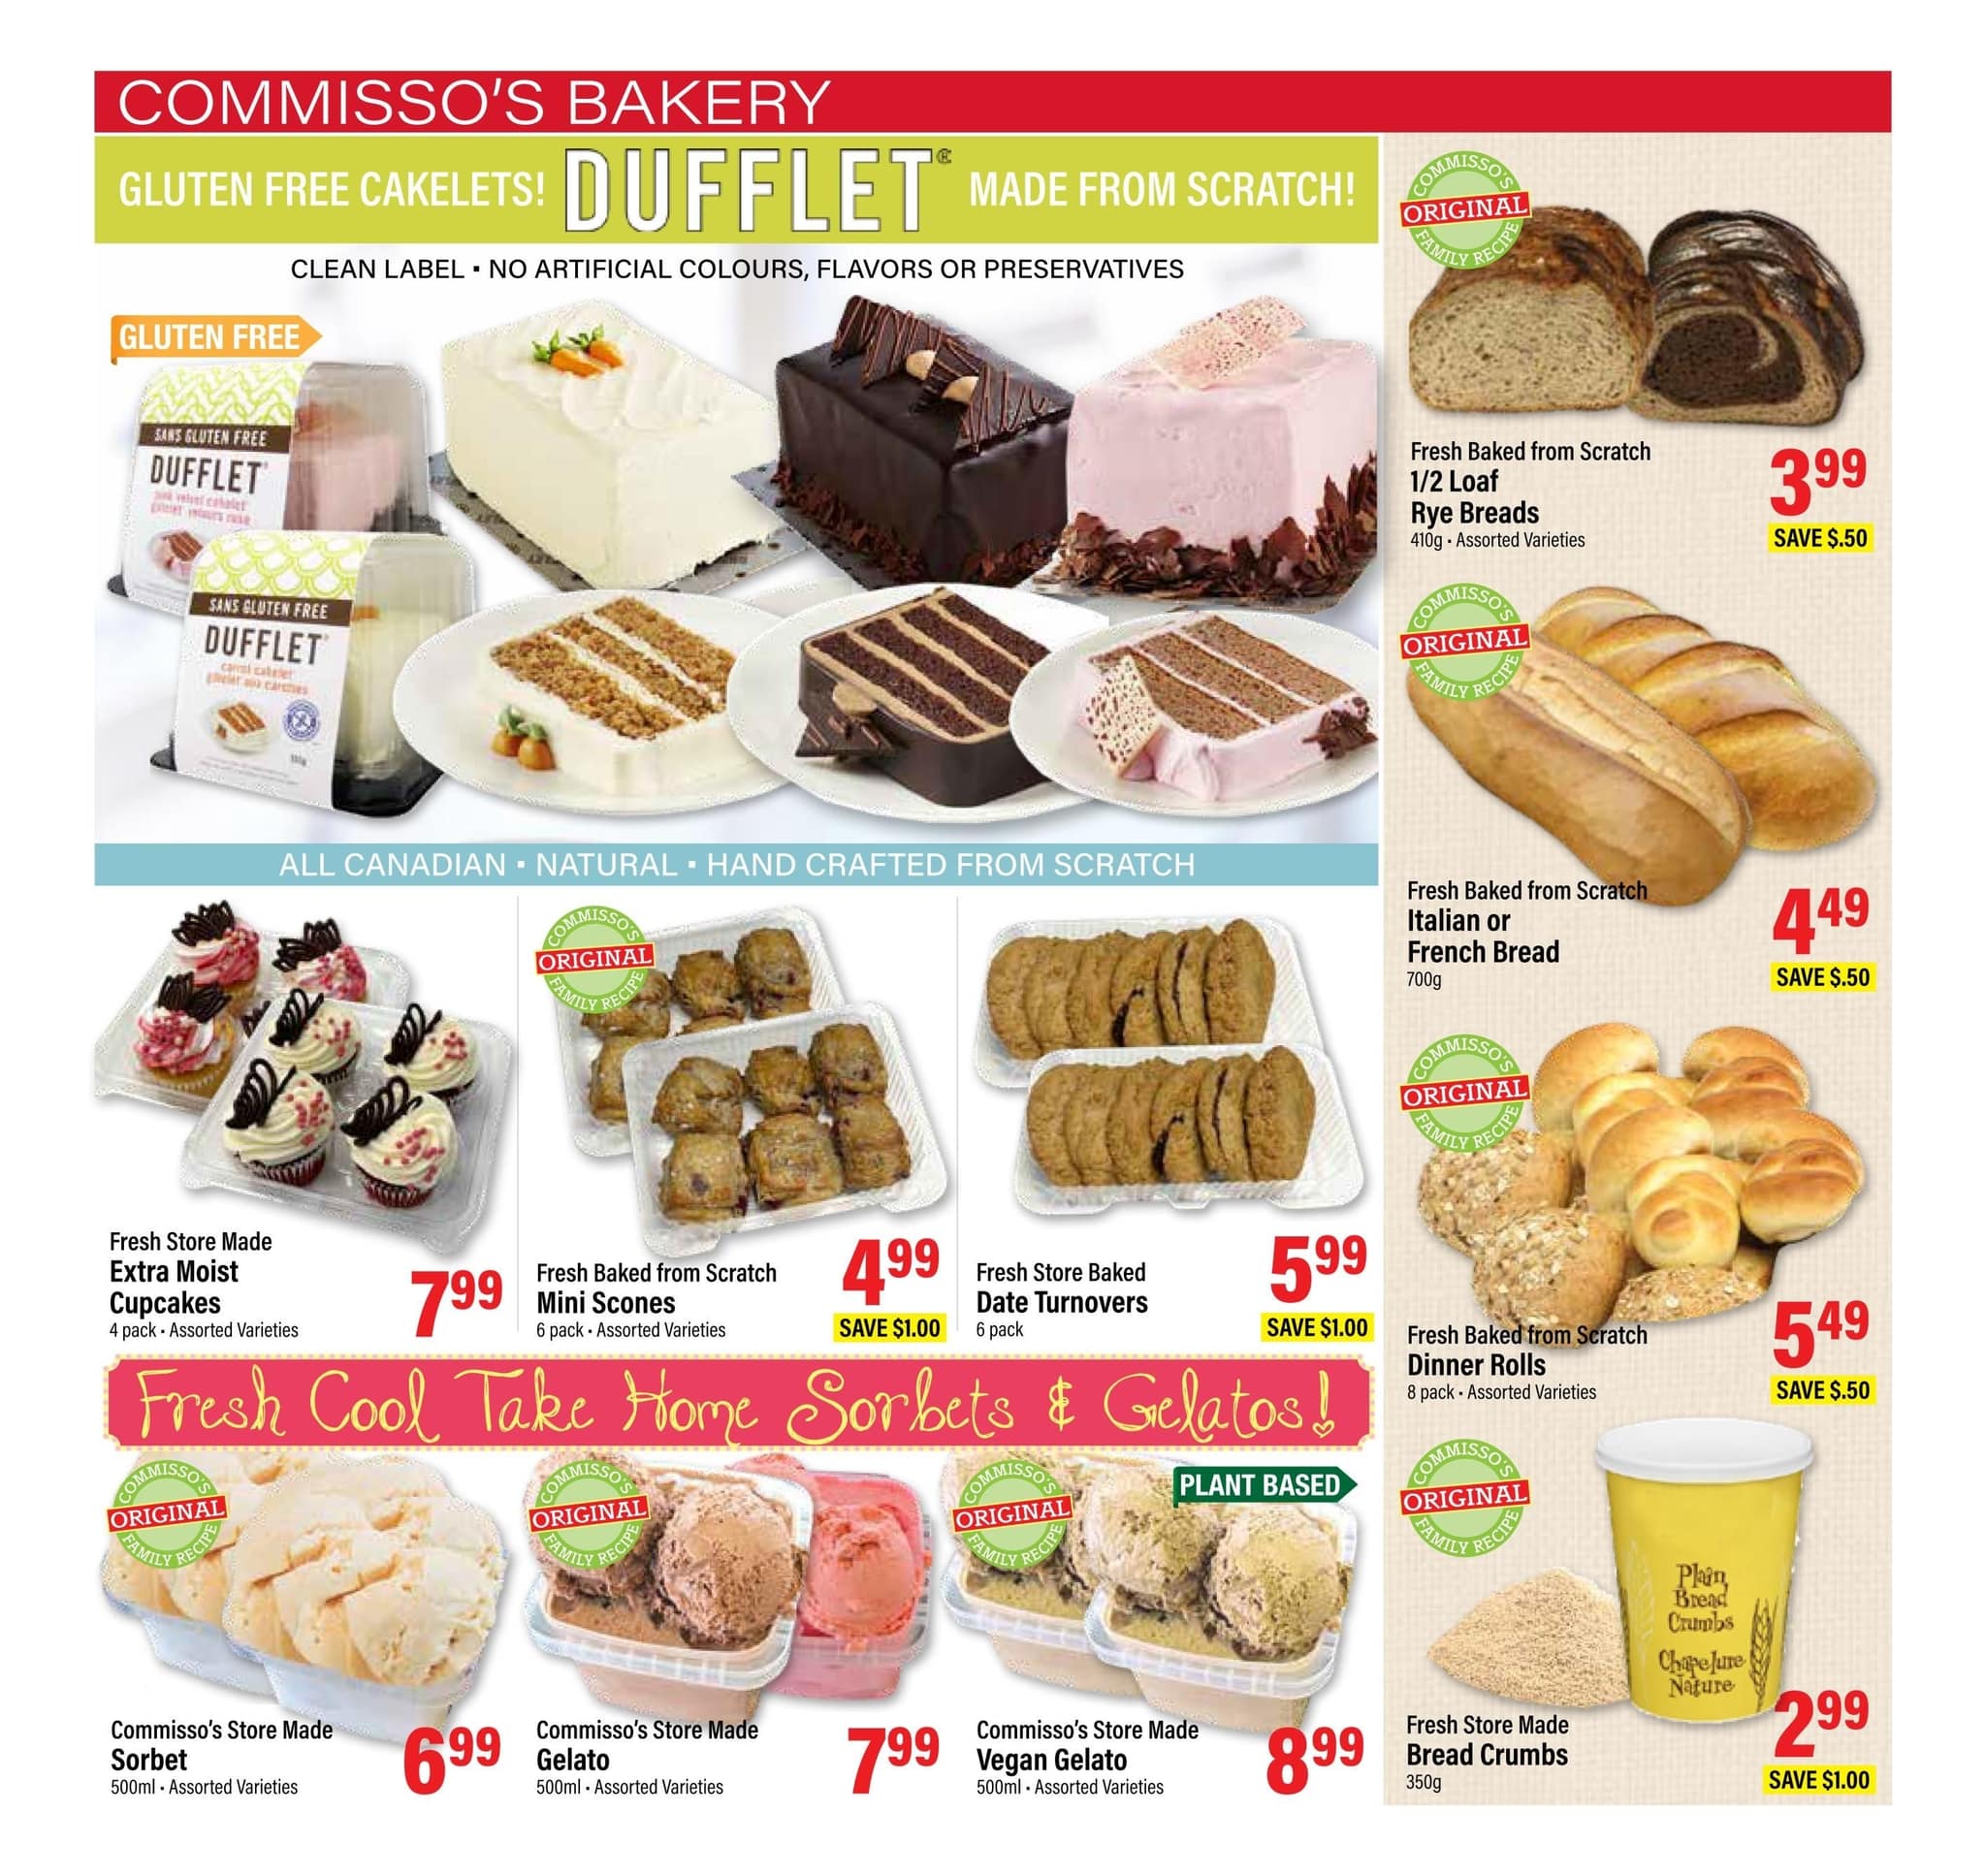 Commisso's Fresh Foods - Weekly Flyer Specials - Page 8